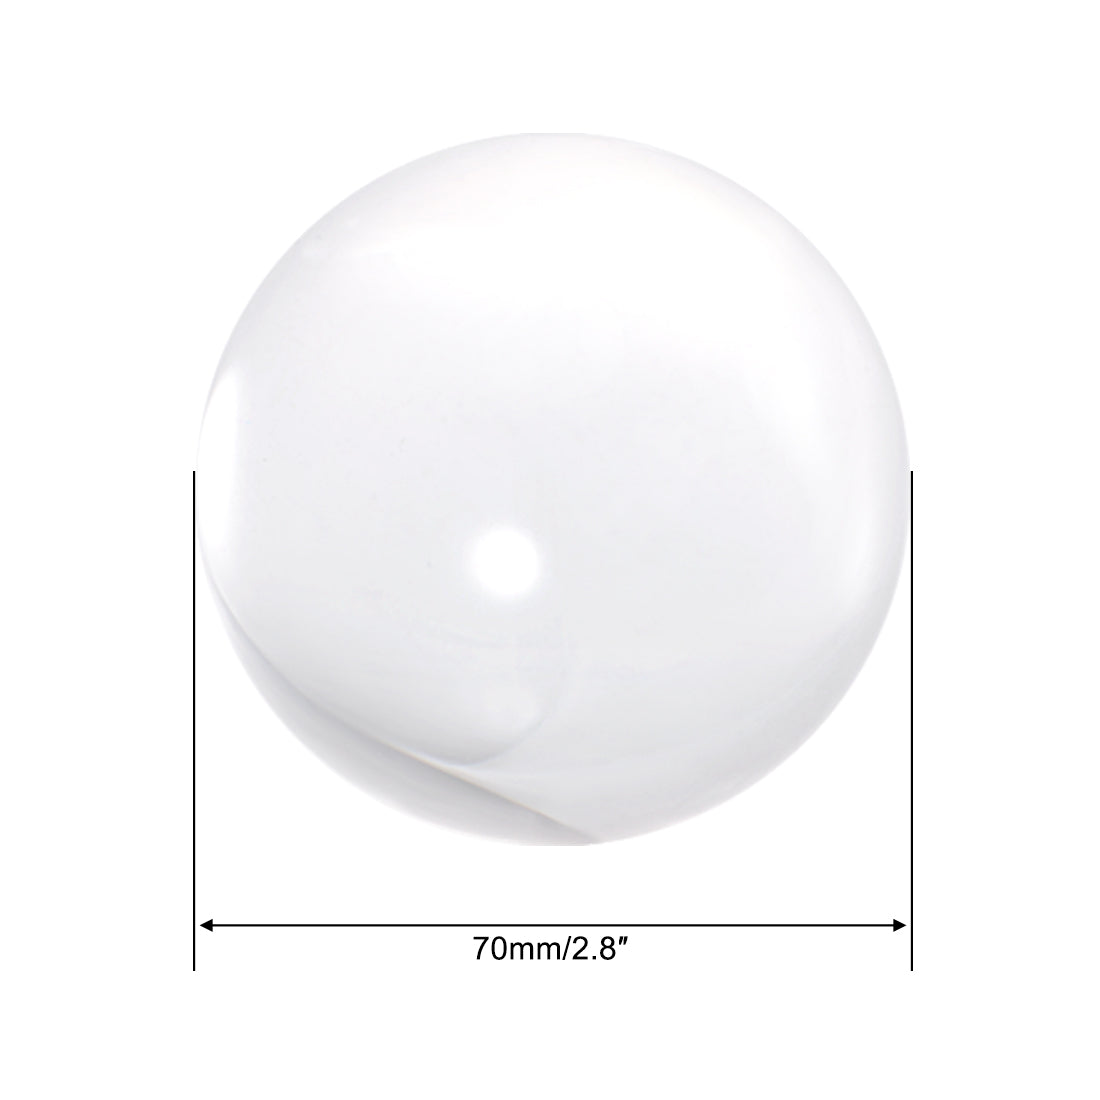 Uxcell Uxcell 40mm Diameter Acrylic Ball Black Sphere Ornament 1.6 Inches